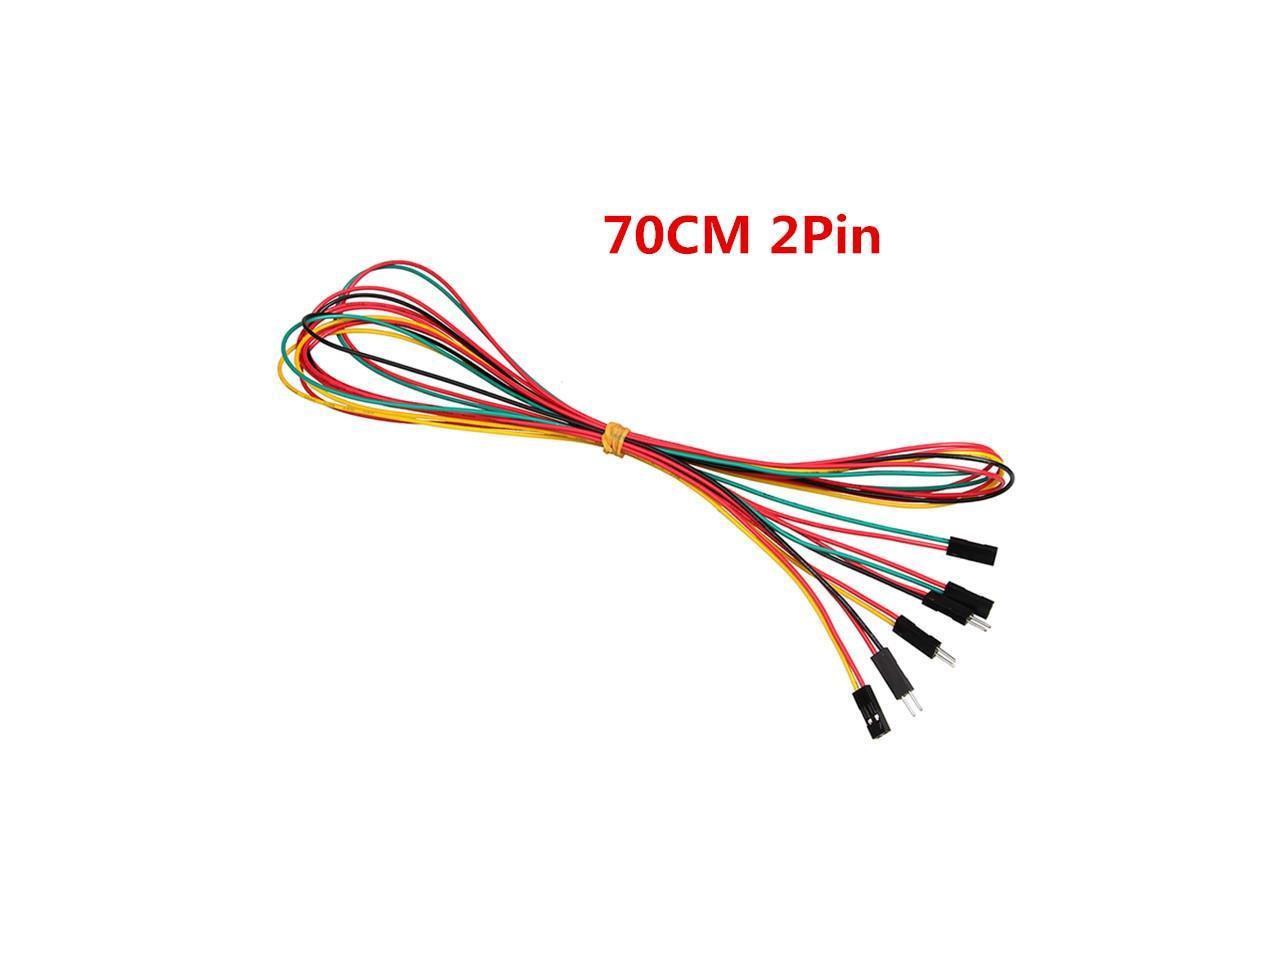 New 10pcs 70cm Jumper wire Ramps1.4 Basic Wiring cable set Female to Female 